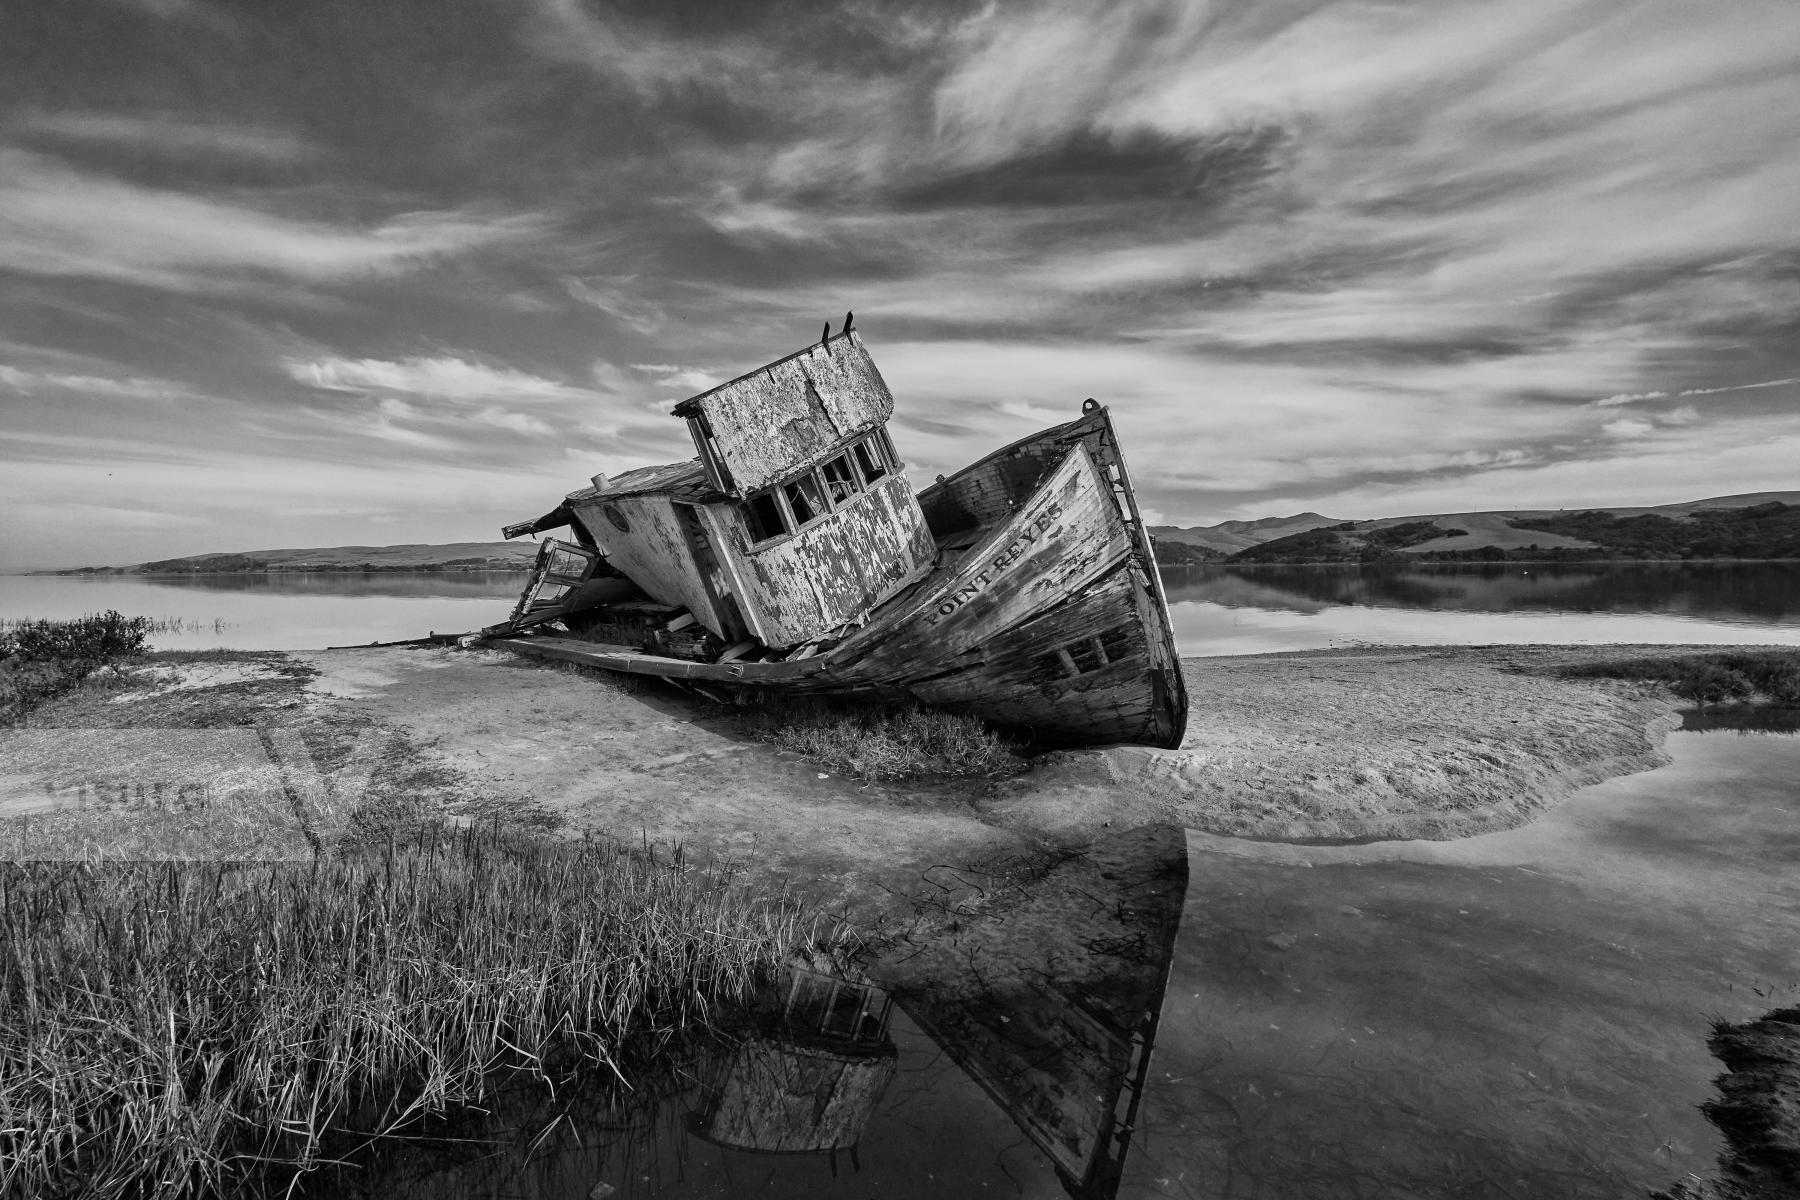 Purchase Point Reyes Shipwreck by Jared Chandler